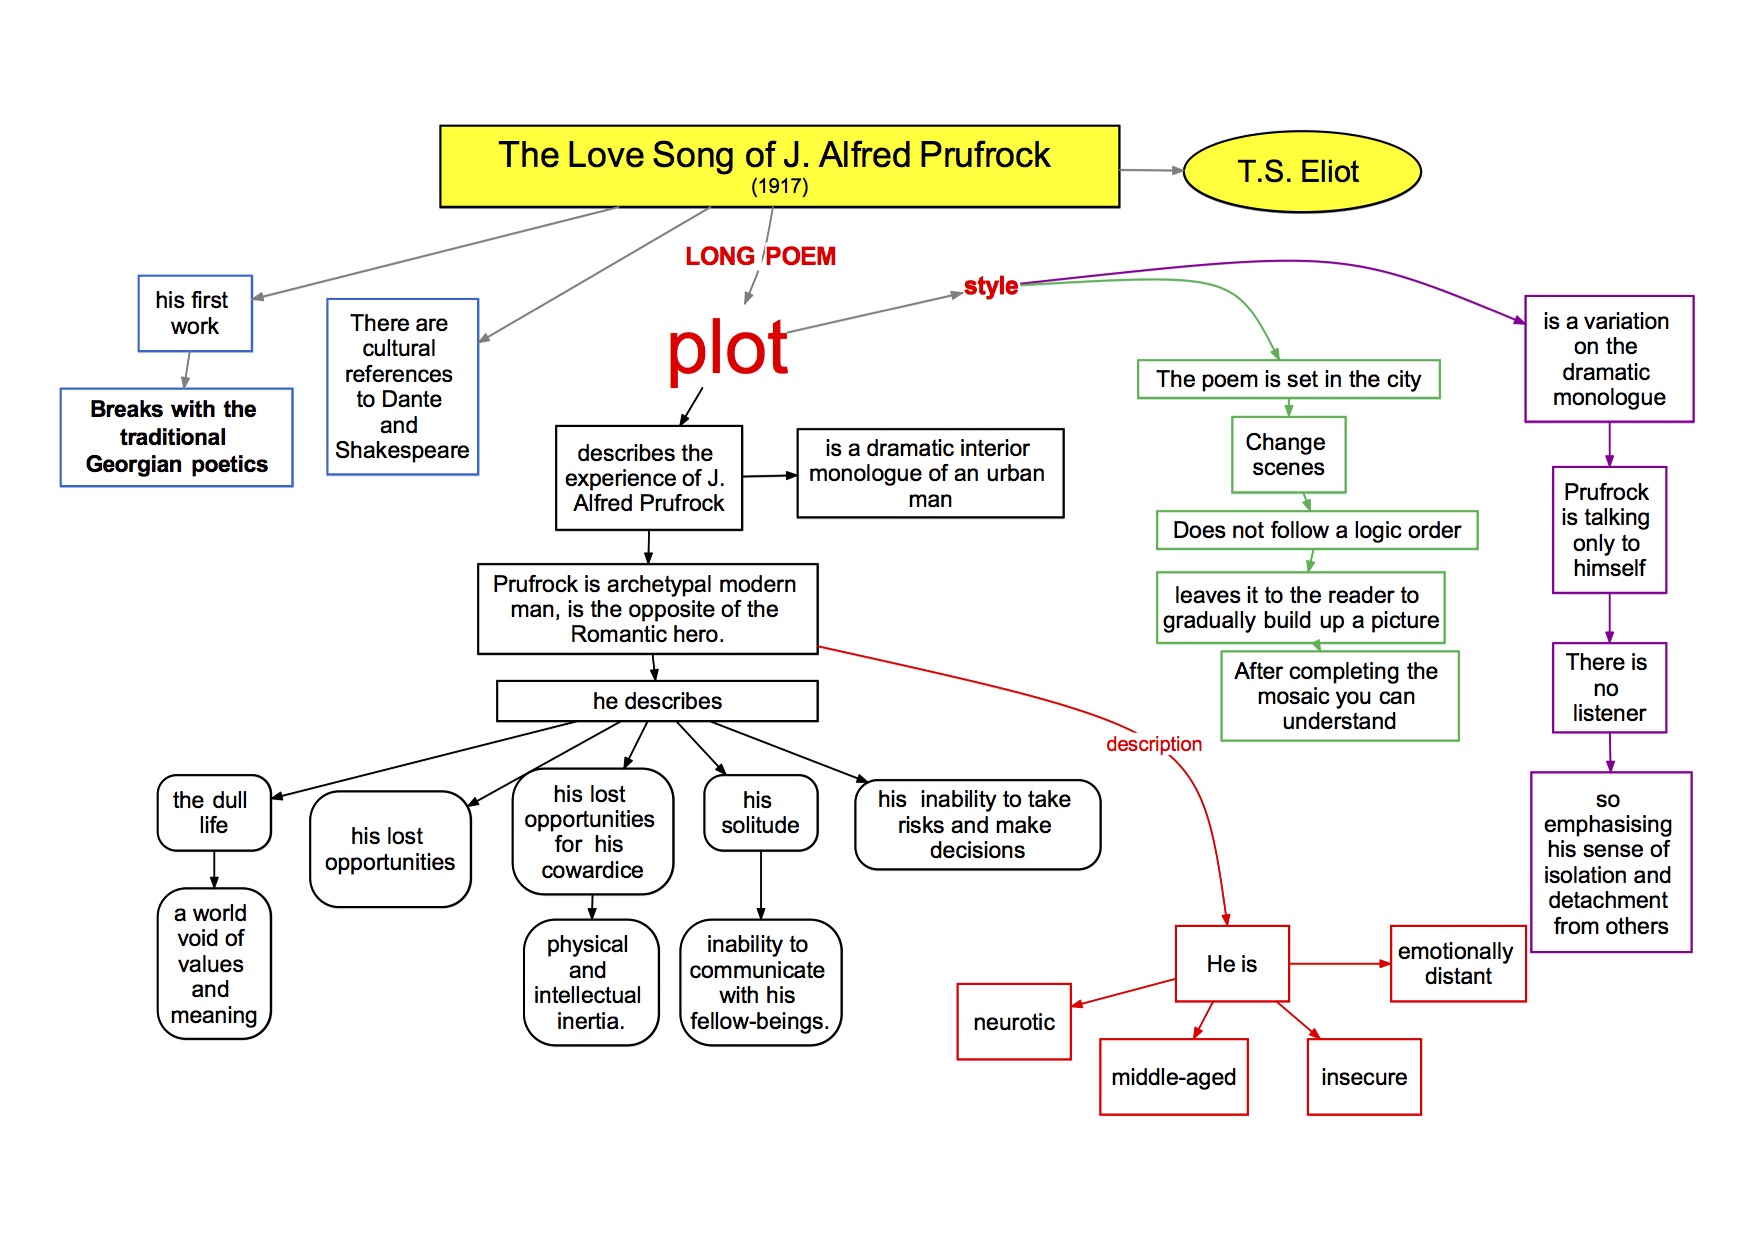 mappa concettuale visual map Inglese T. S. Eliot-The Love Song of J. Alfred Prufrock  plot